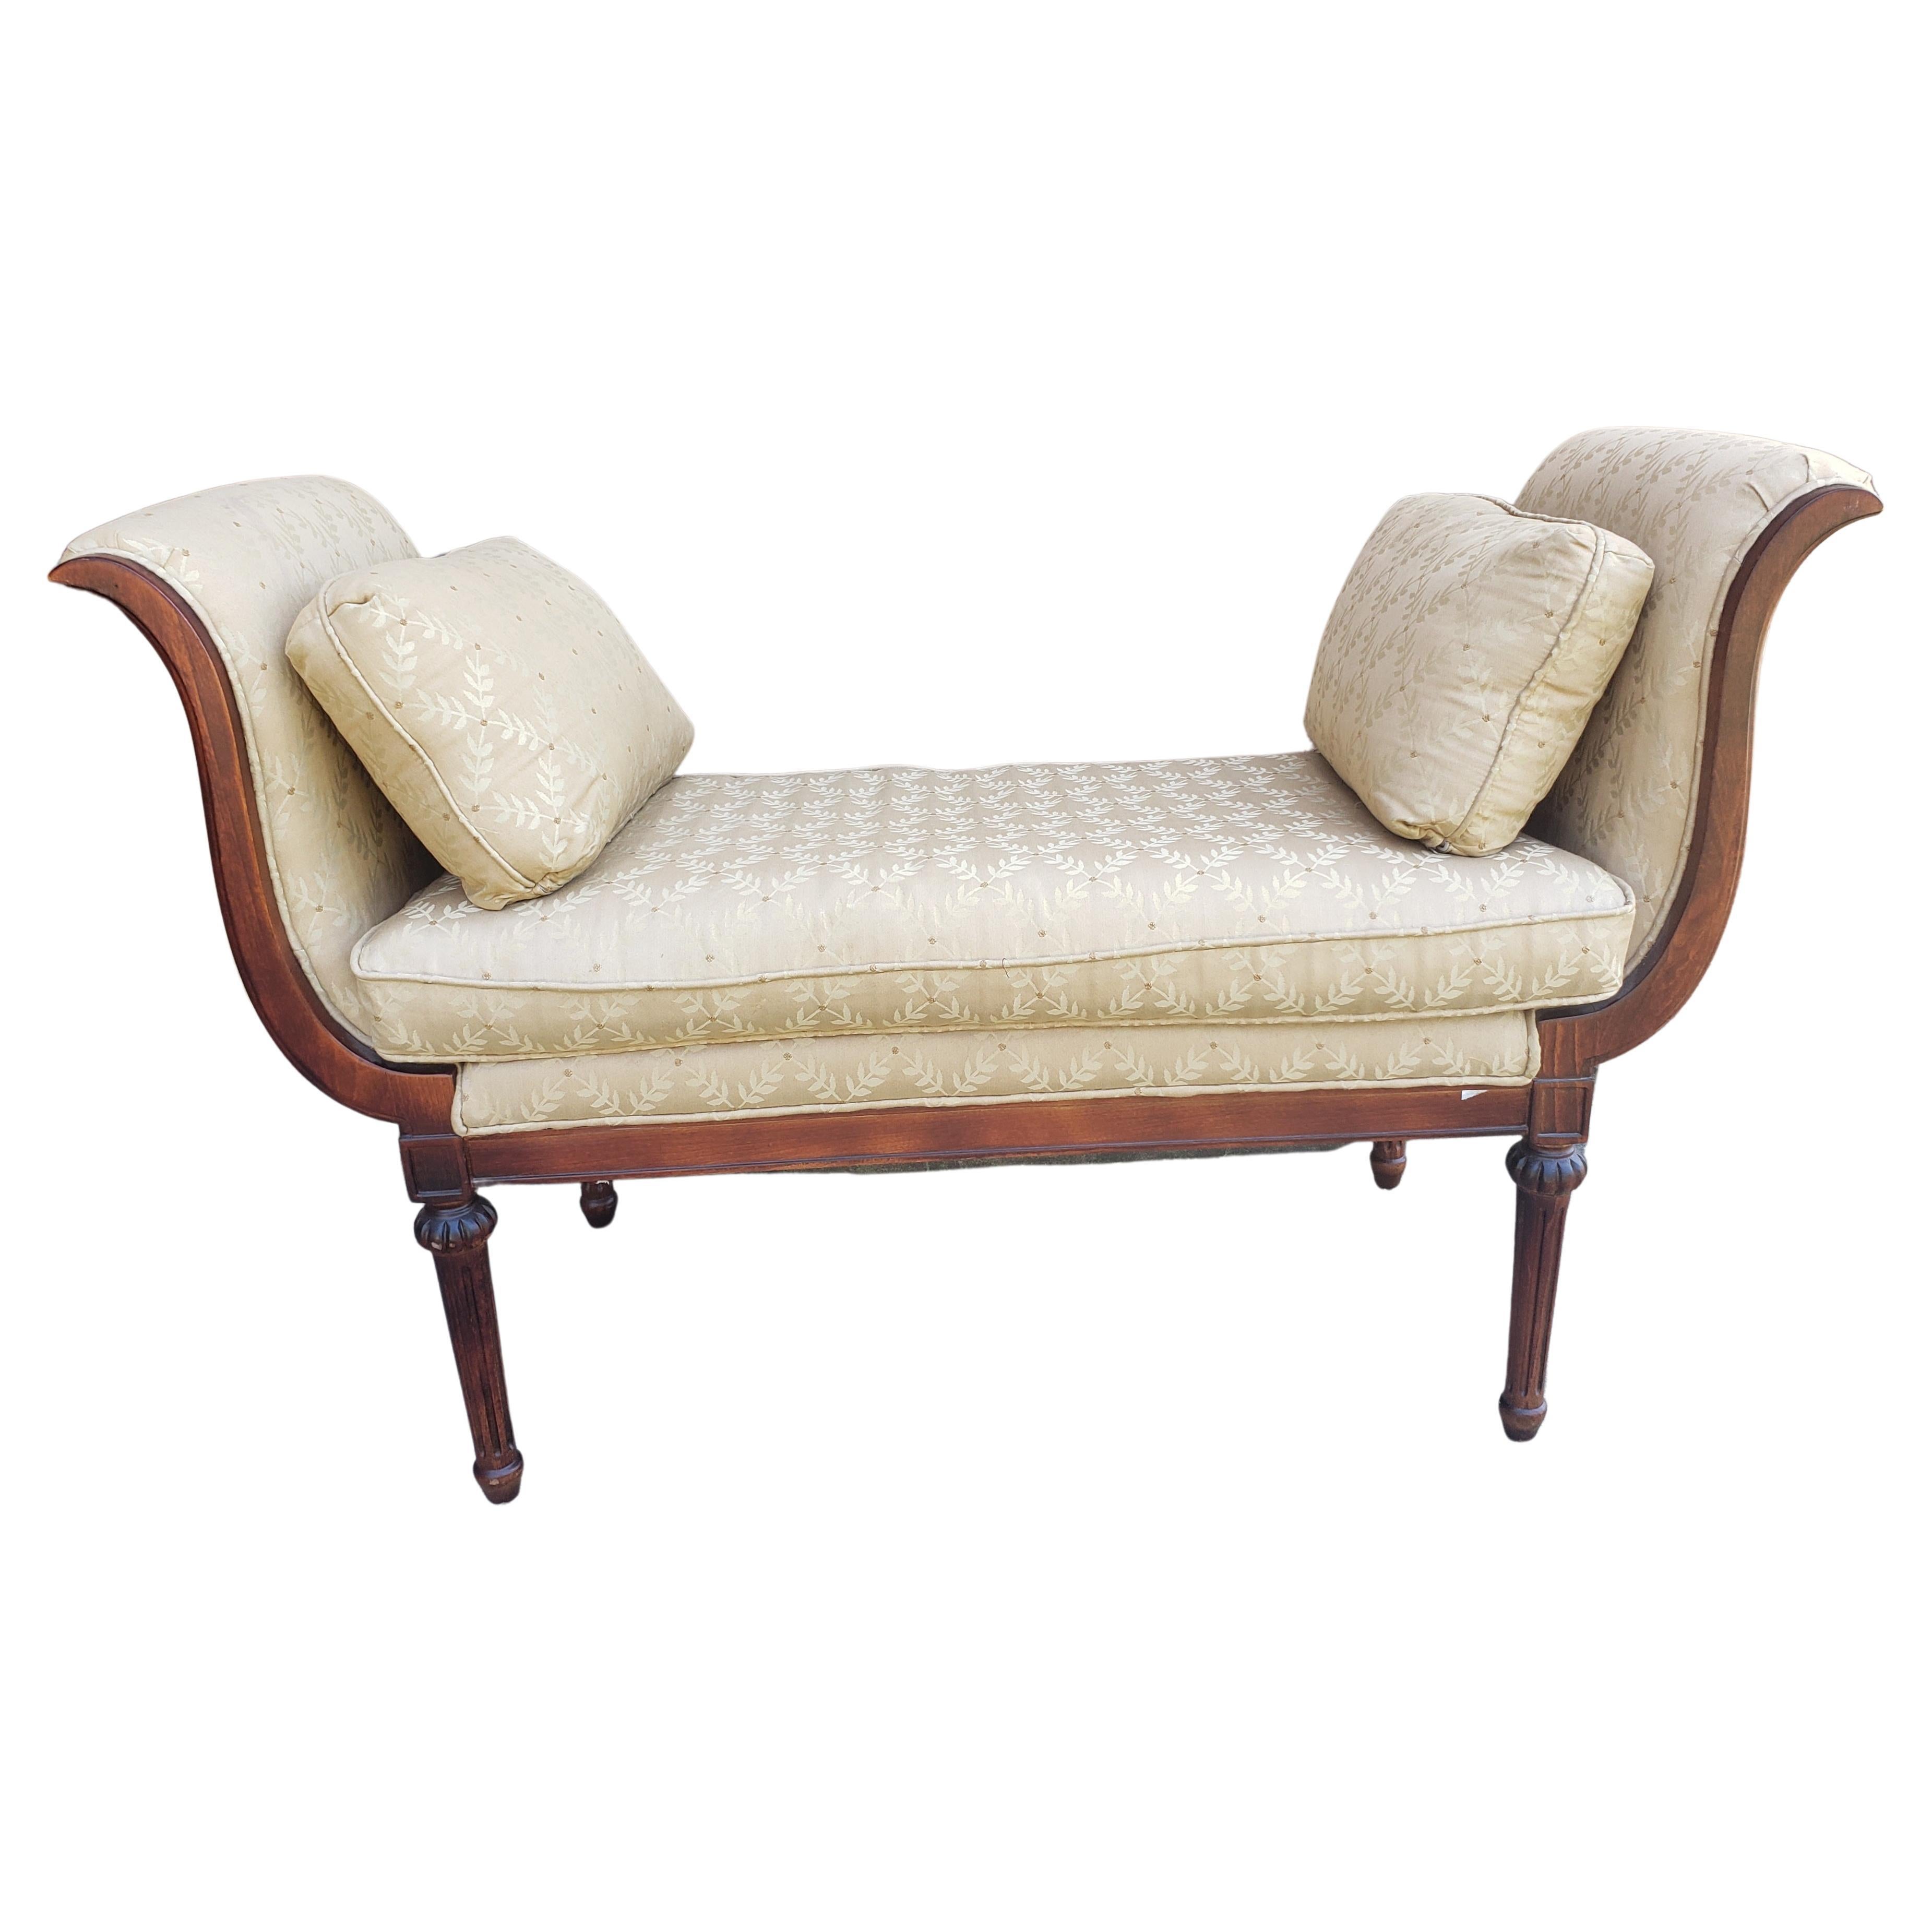 American Louis XVI Scroll Arms Mahogany and Upholstered Bench with Pillows